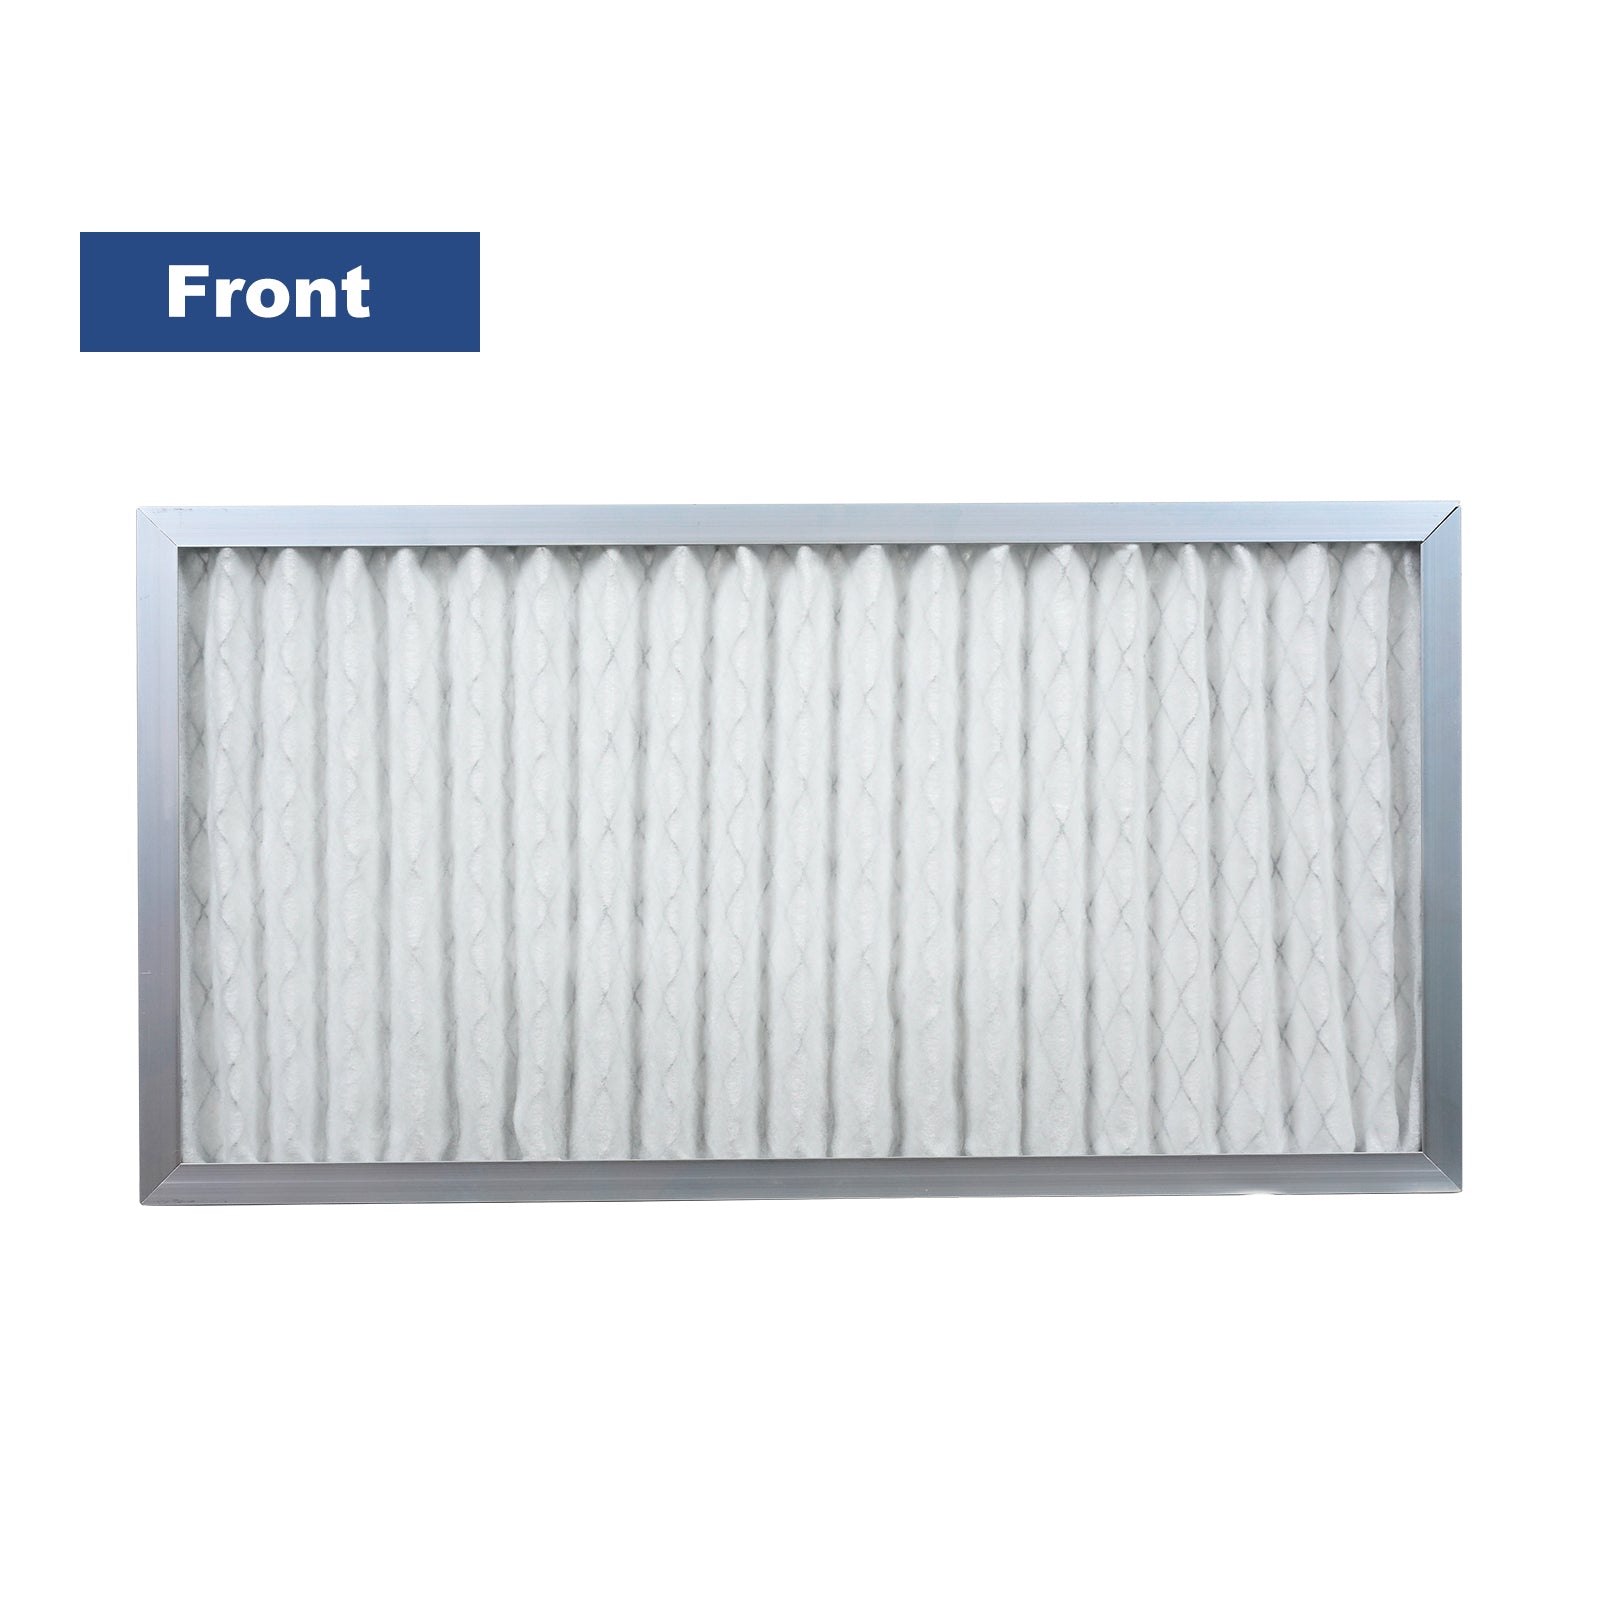 Prevent Airborne Contaminants with AlorAir MERV-10 Filters for Storm SLGR 1600X - Front View